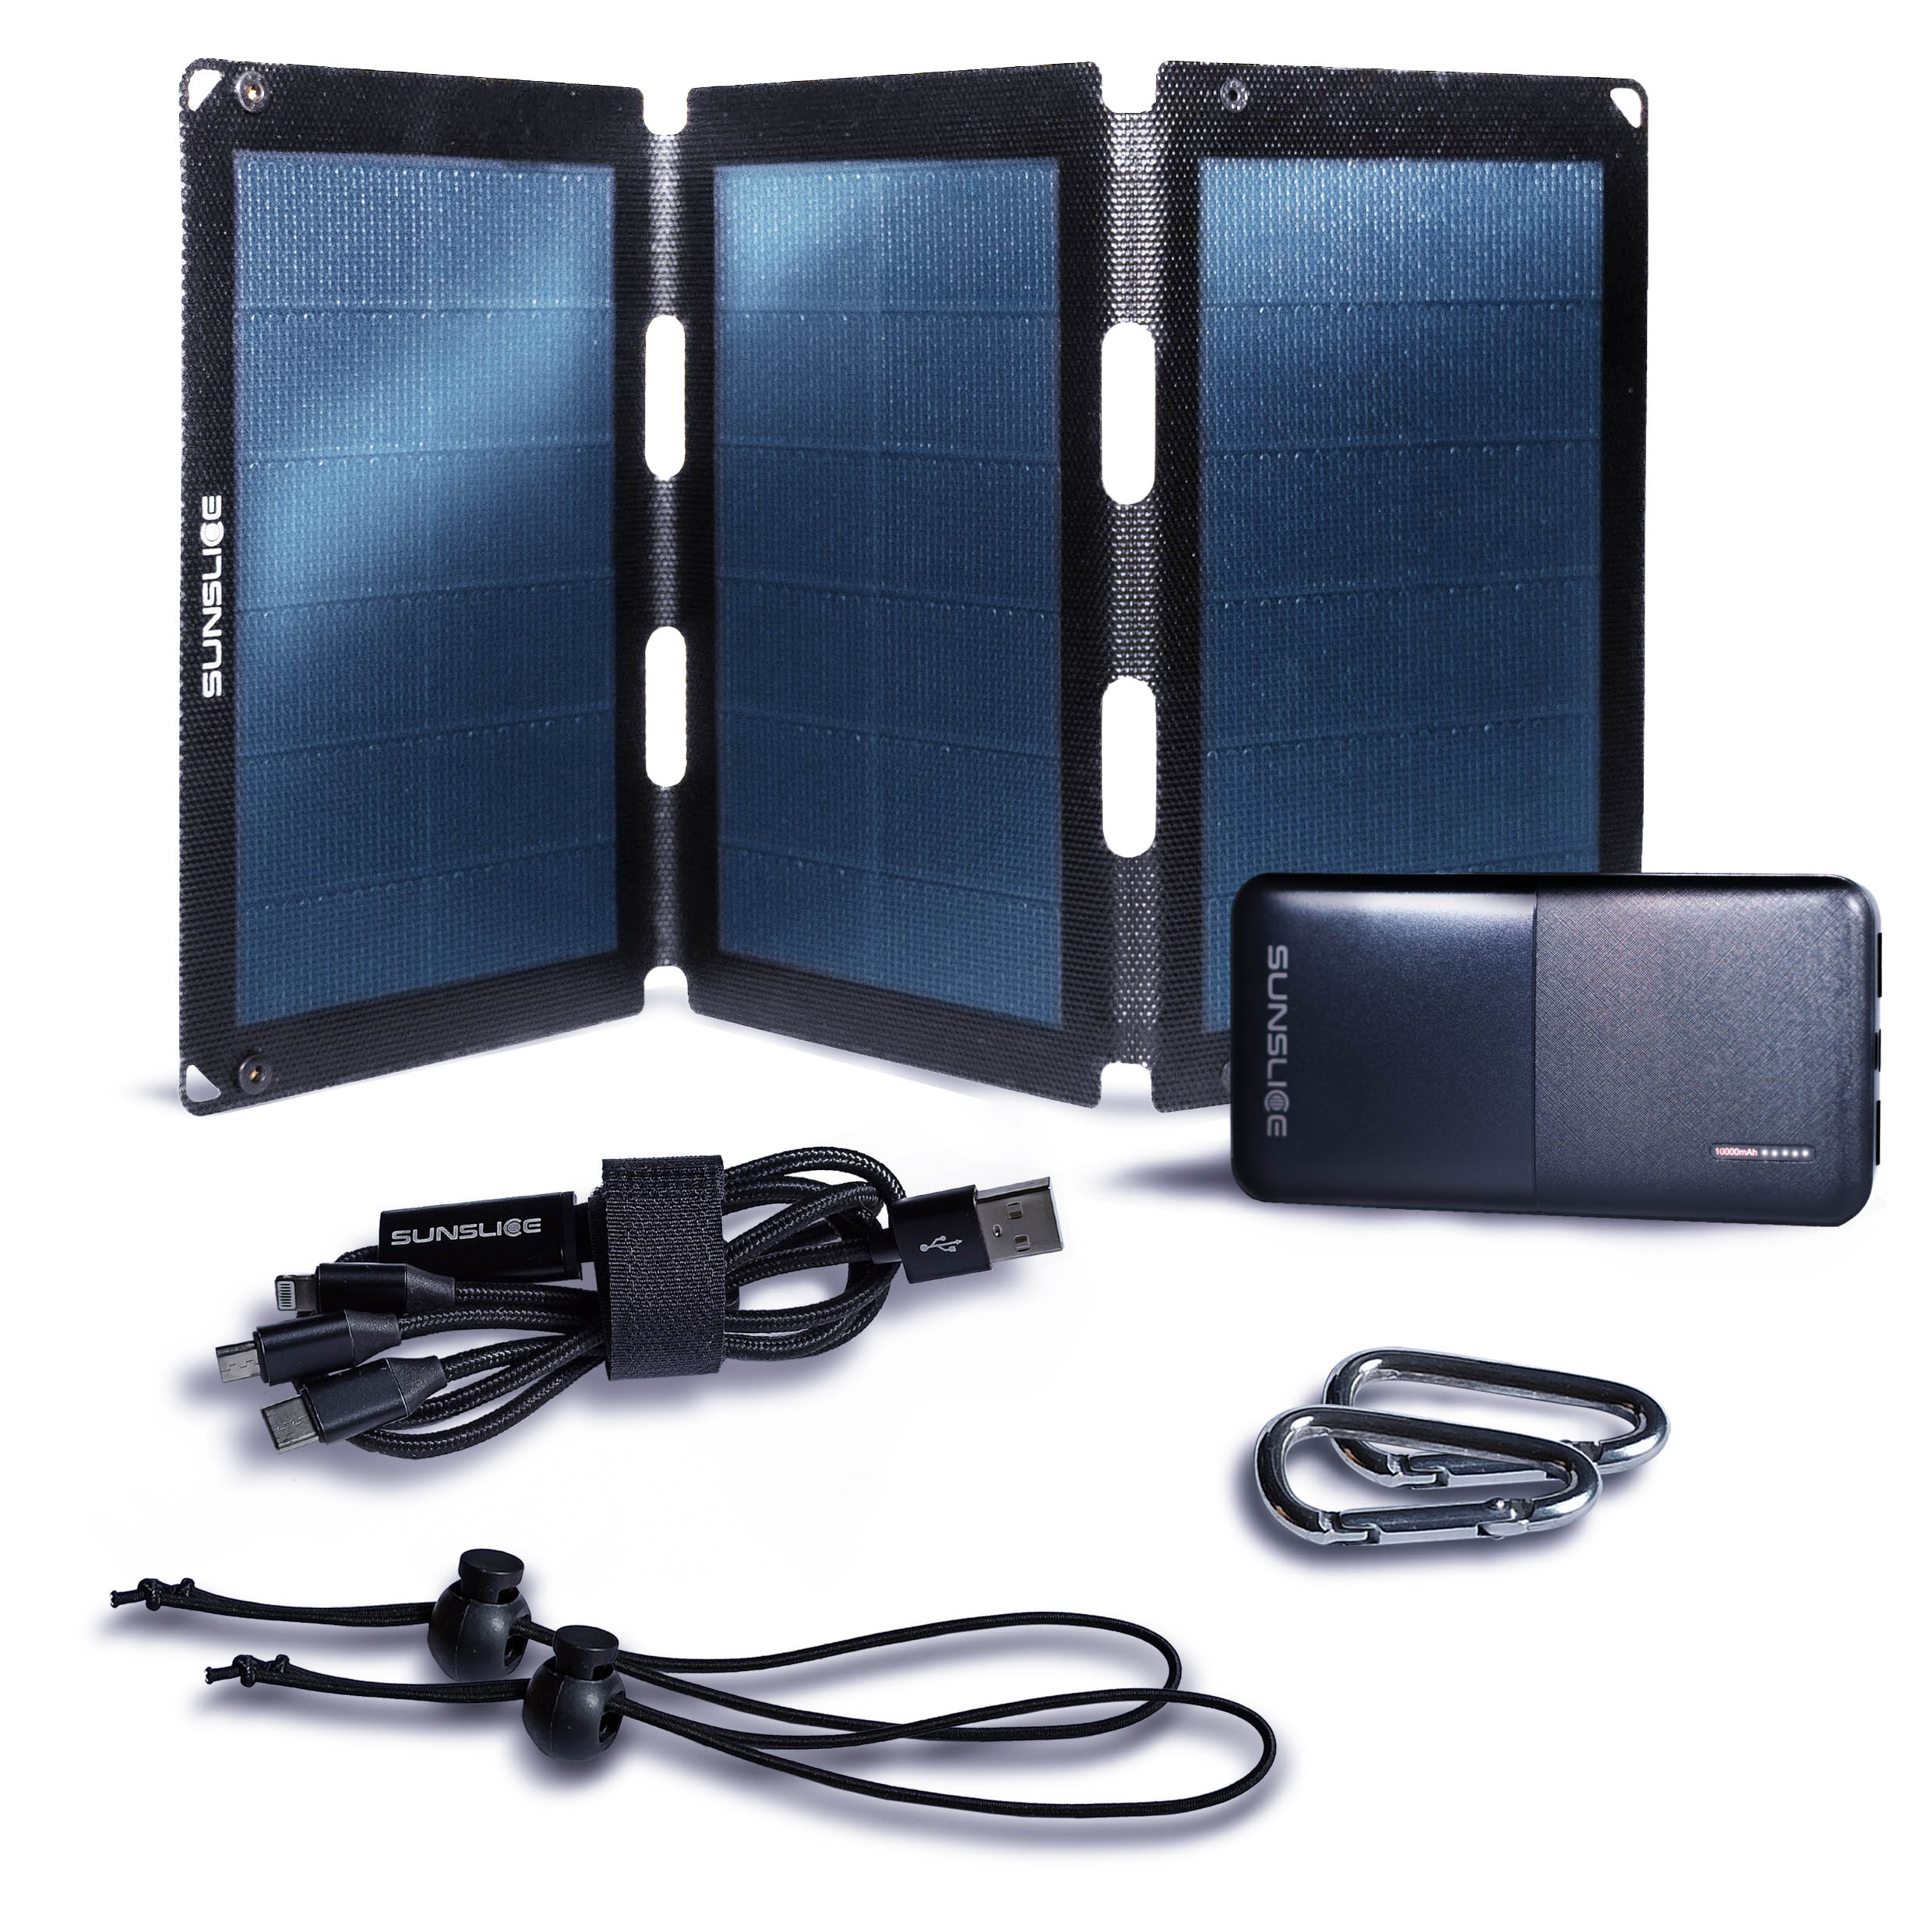 portable solar panel for camping connected to an external battery Gravity10